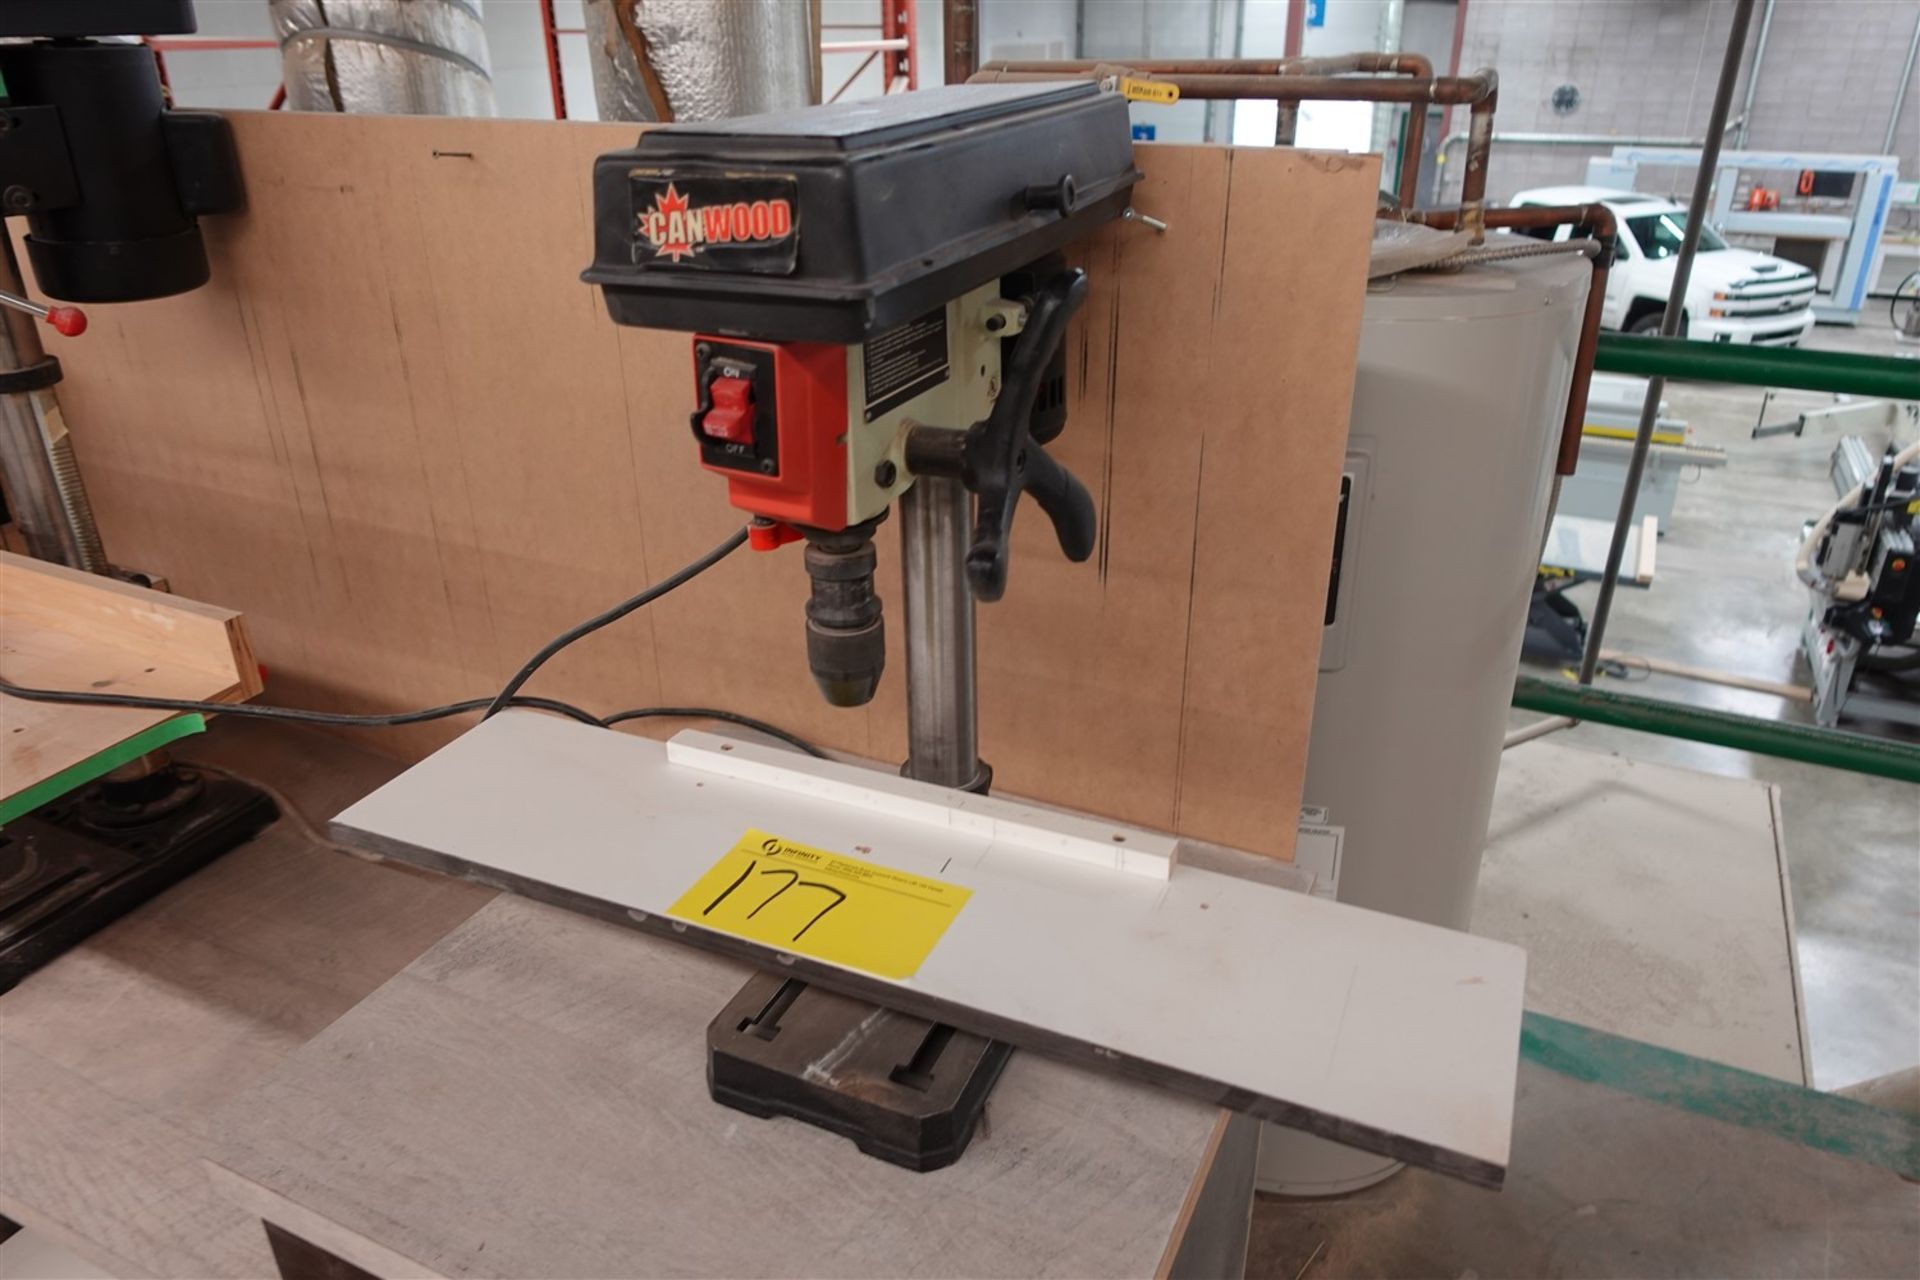 CANWOOD DRILL PRESS